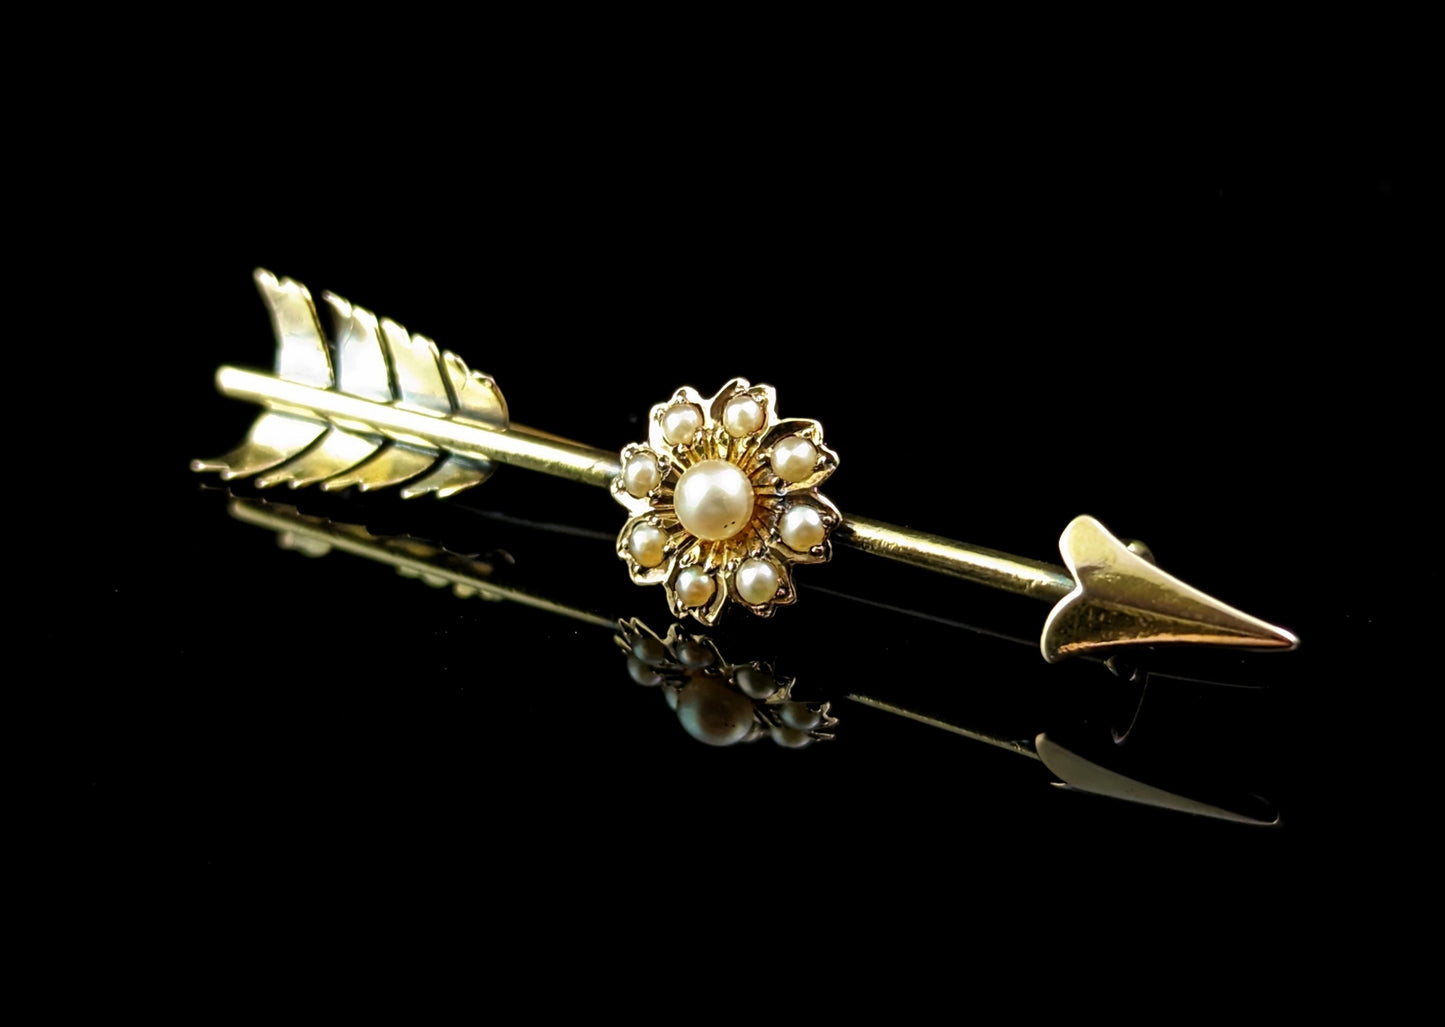 Antique Arrow and flower brooch, Pearl and 9ct gold